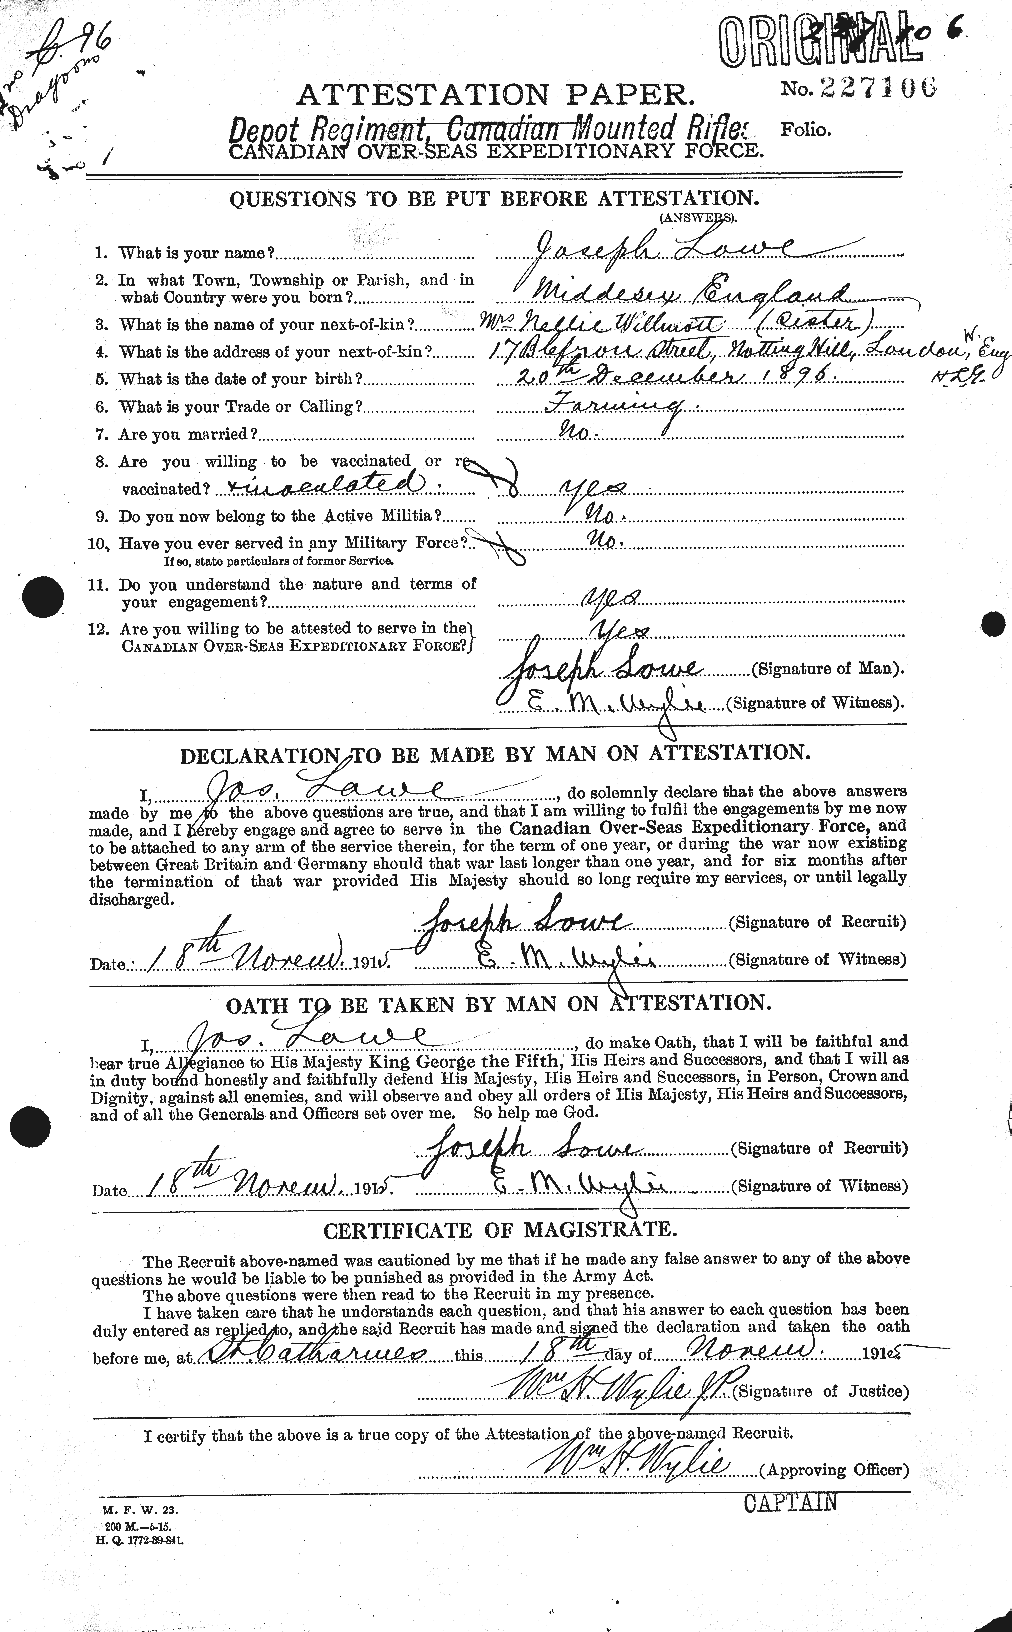 Personnel Records of the First World War - CEF 469647a